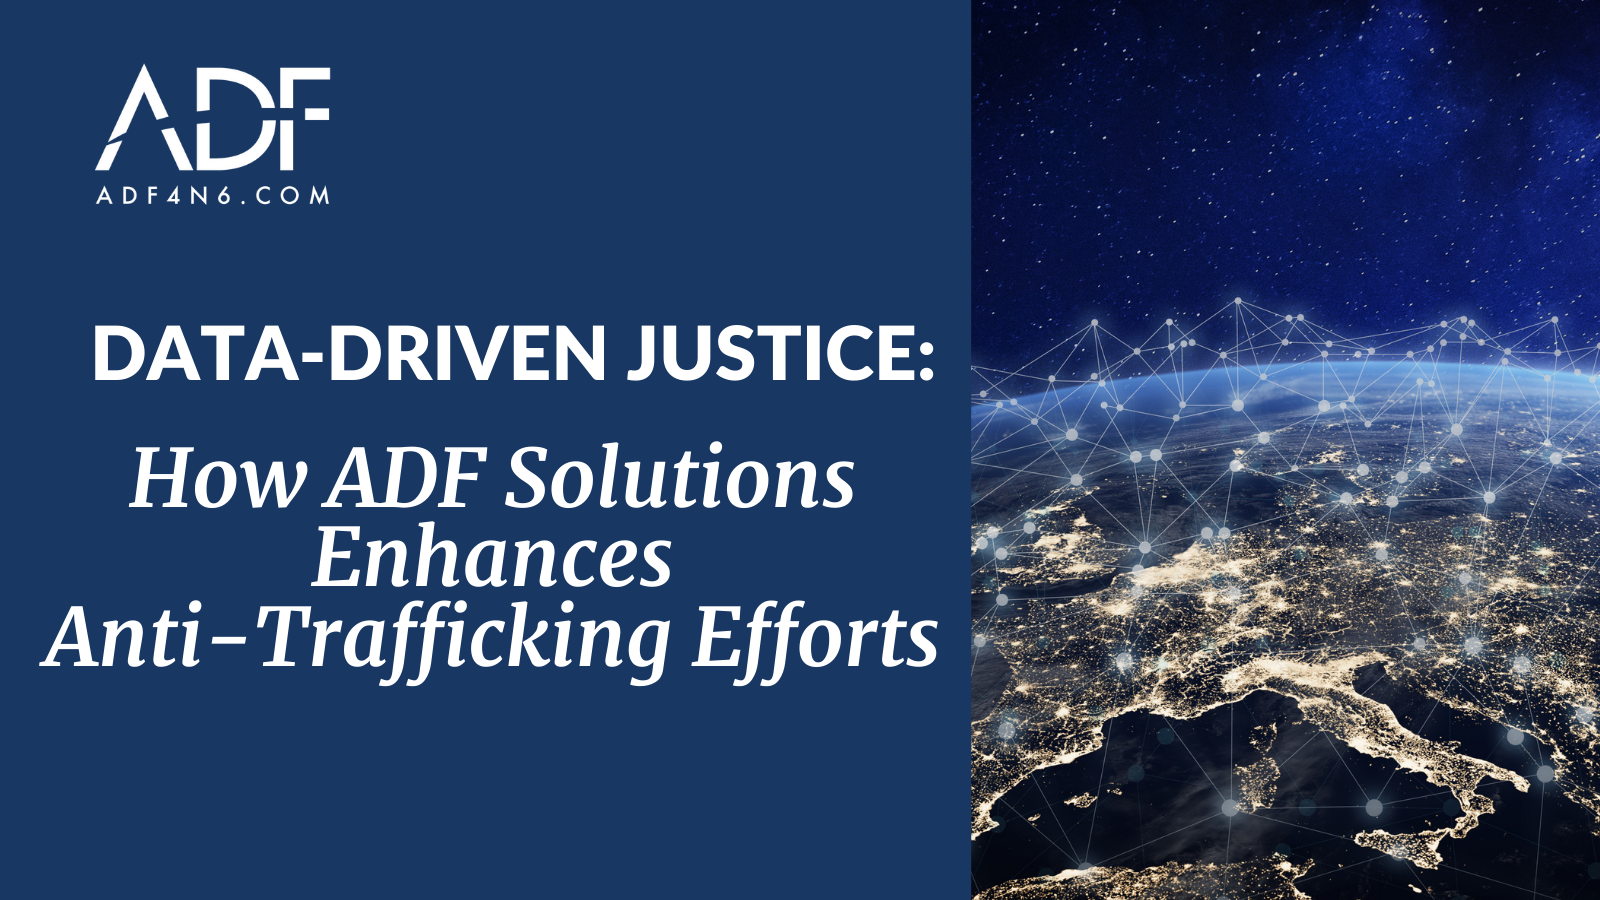 Data-Driven Justice: How ADF Enhances Anti-Trafficking Efforts